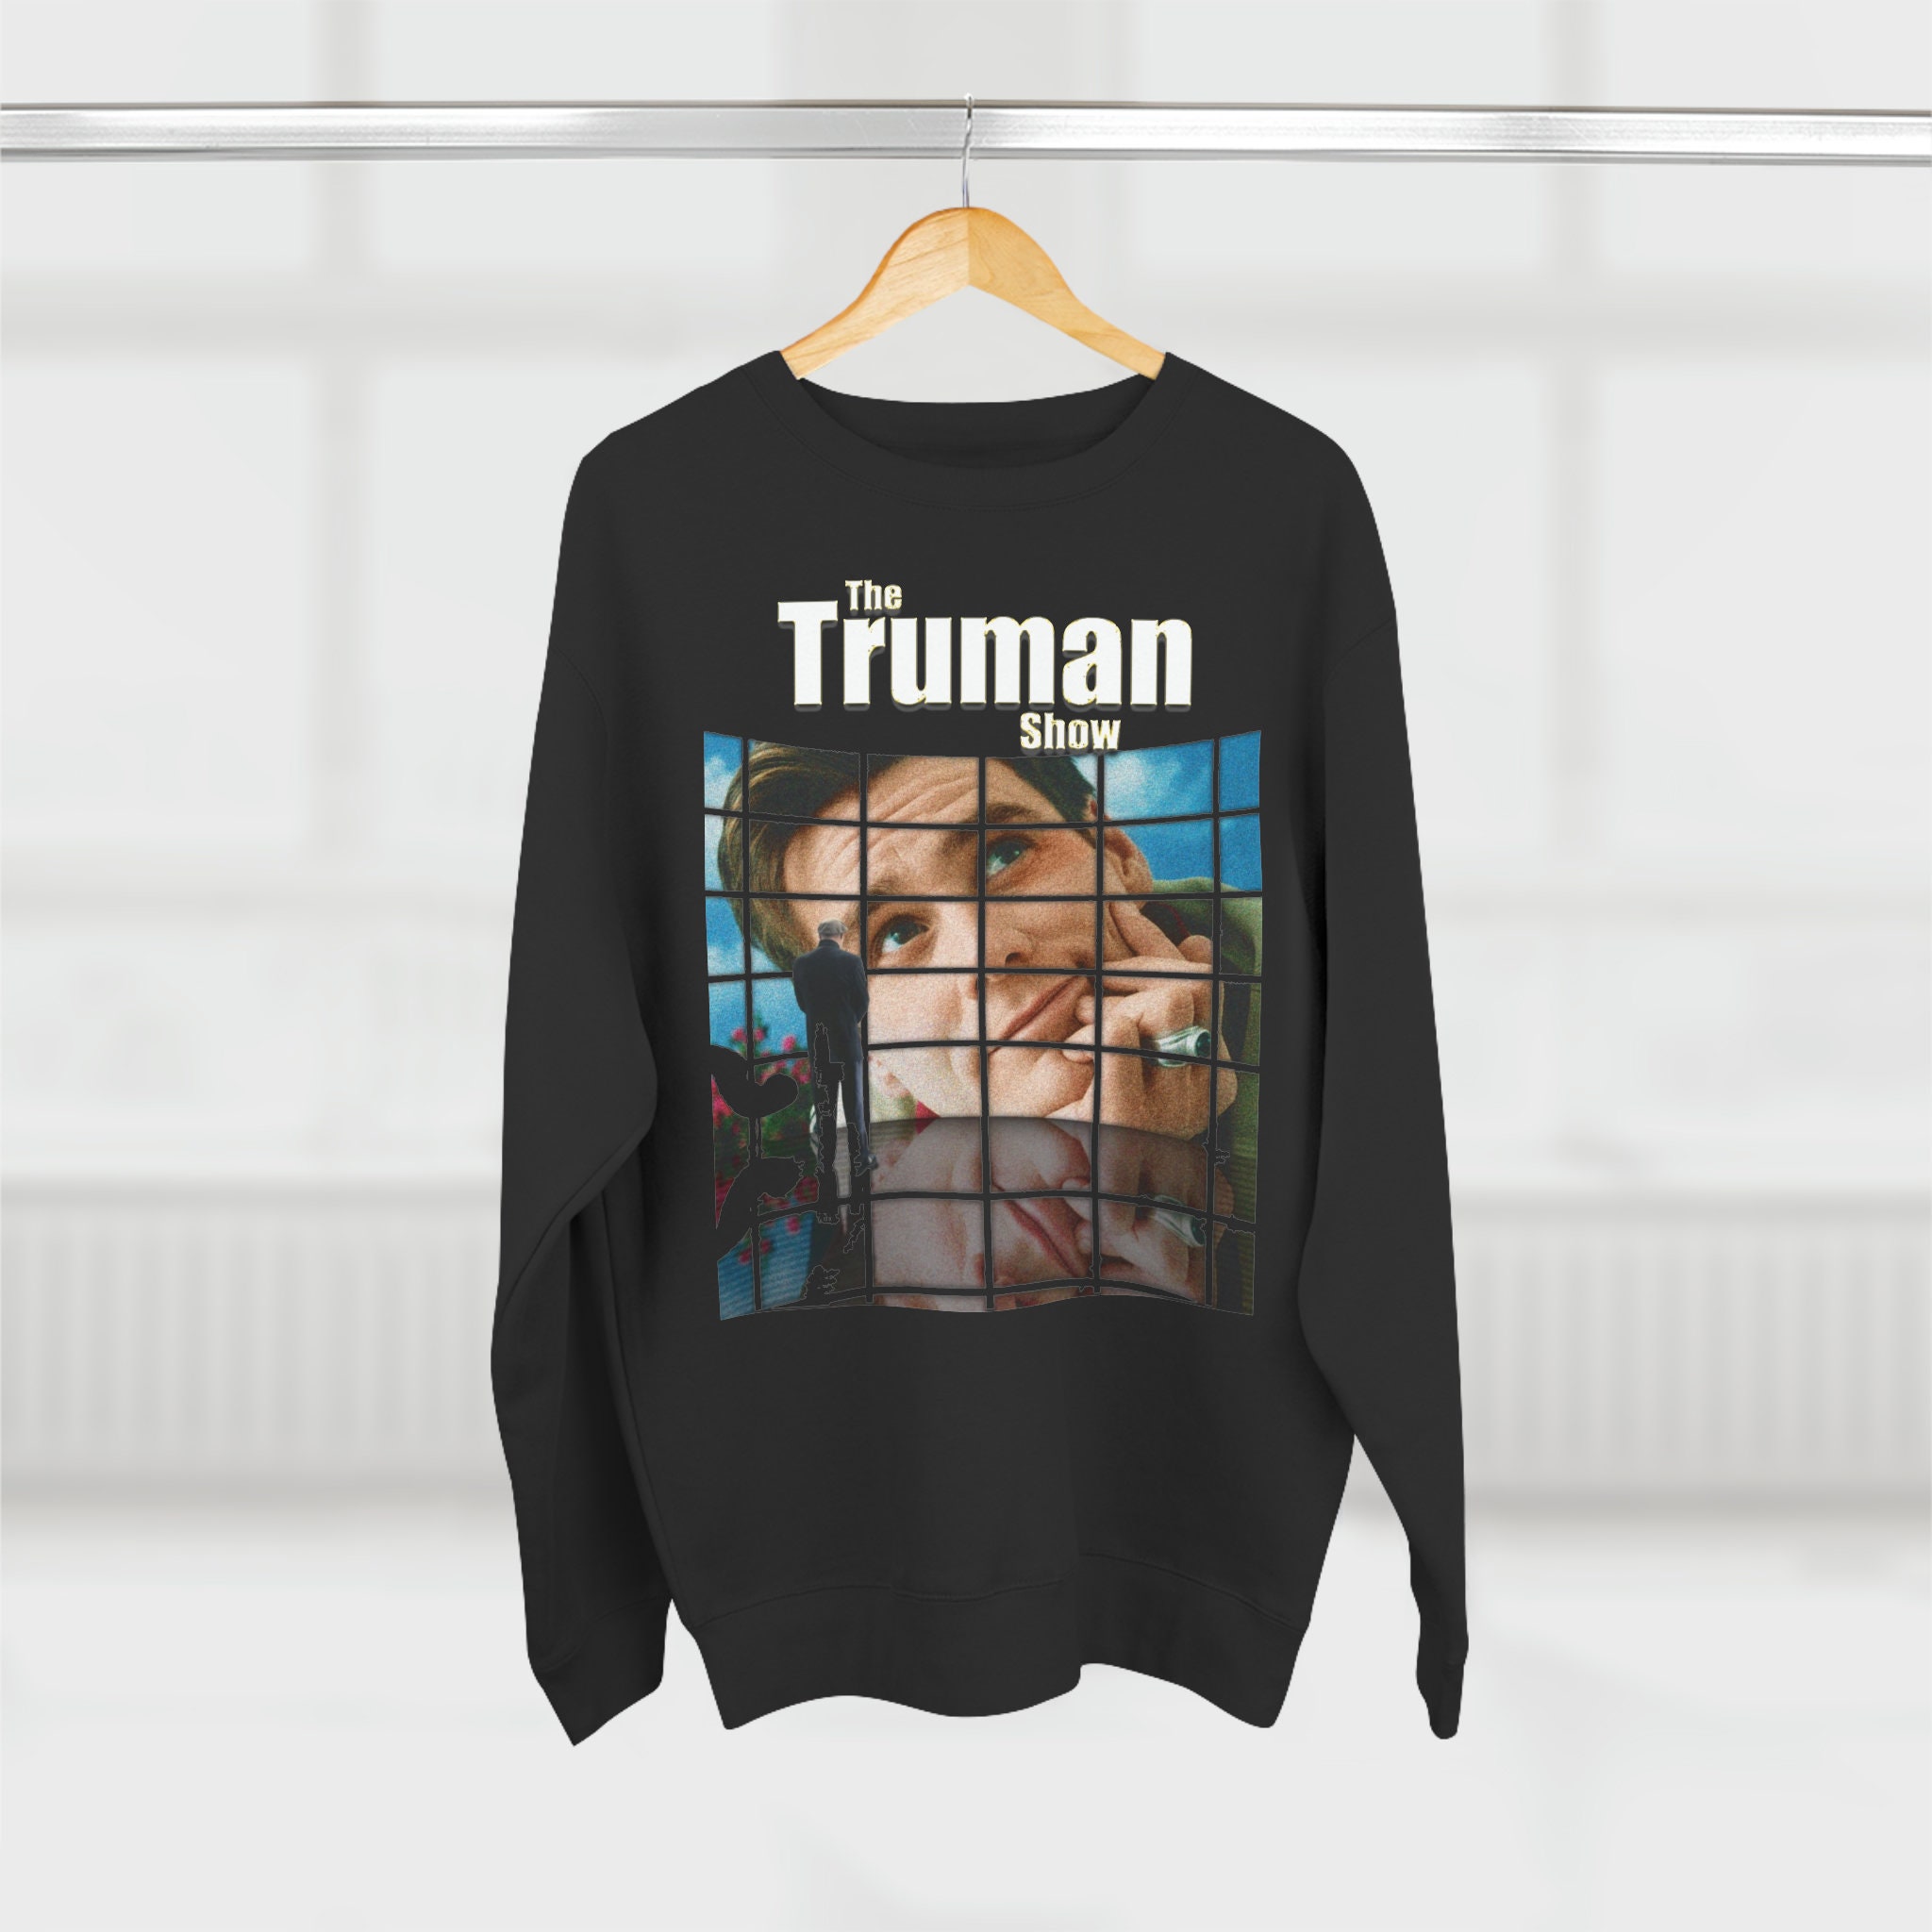 Racking my brain looking for a sweater like Jim's in the Truman Show. I'd  be a size medium (35-37 inch chest) I guess, I'm also located in Australia.  Price doesn't really matter.